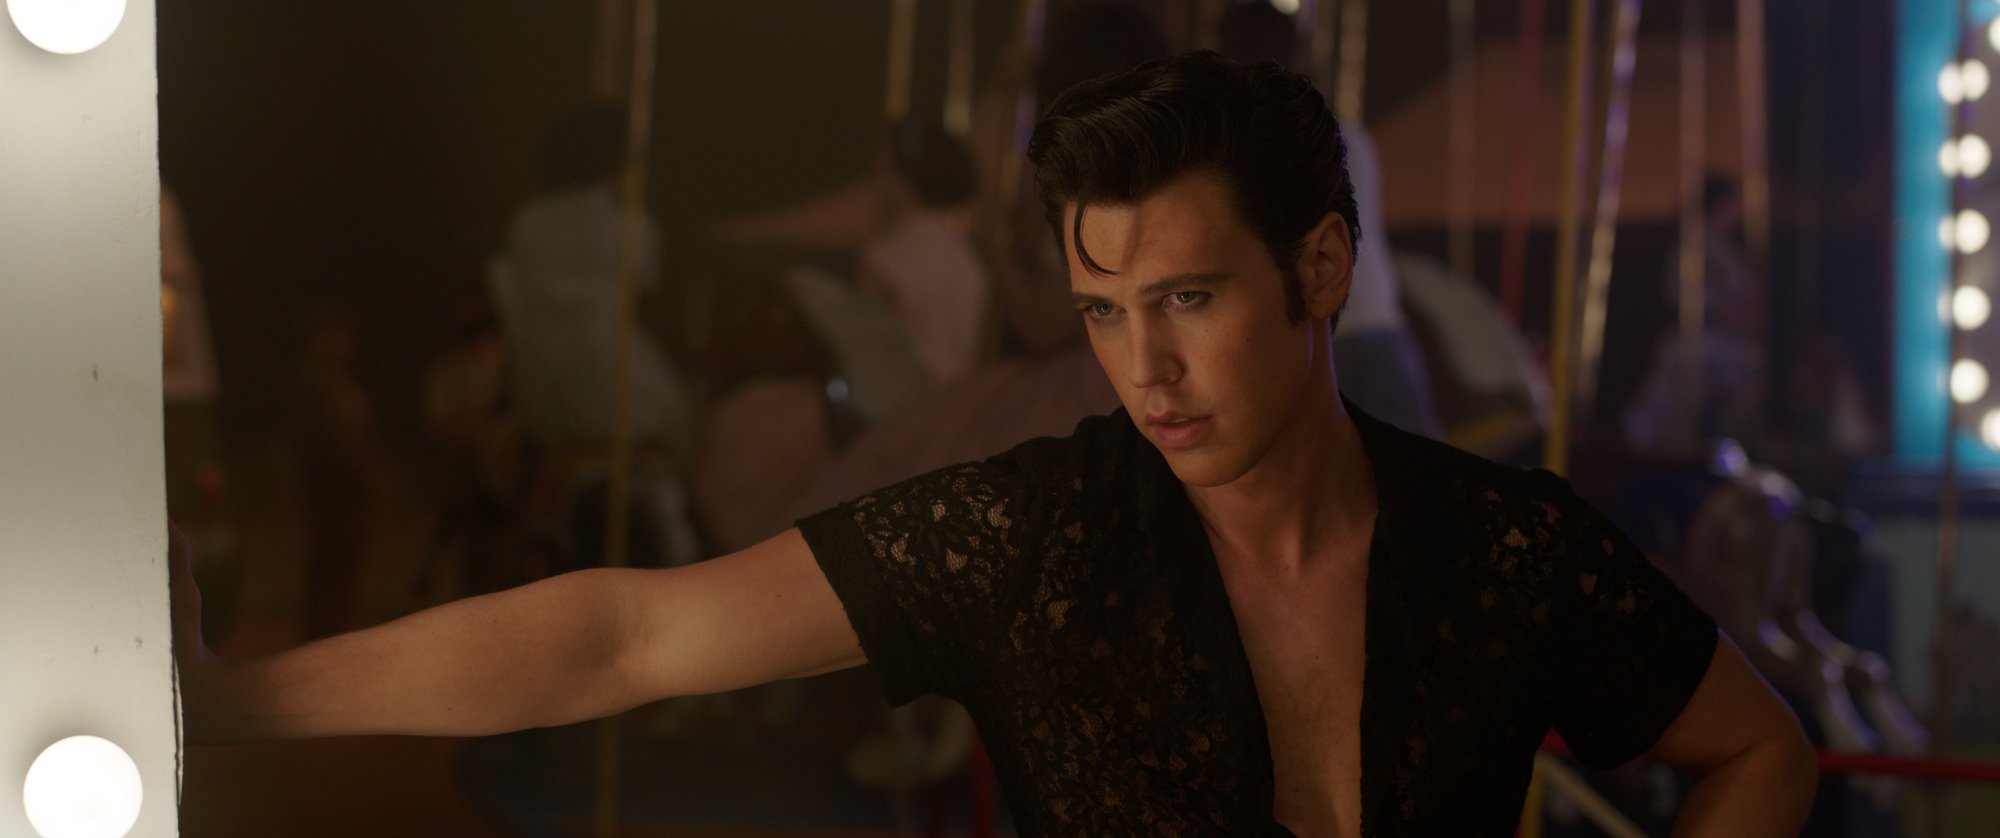 'Elvis' Austin Butler as Elvis Presley with the iconic hair, wearing black with production people rushing behind him